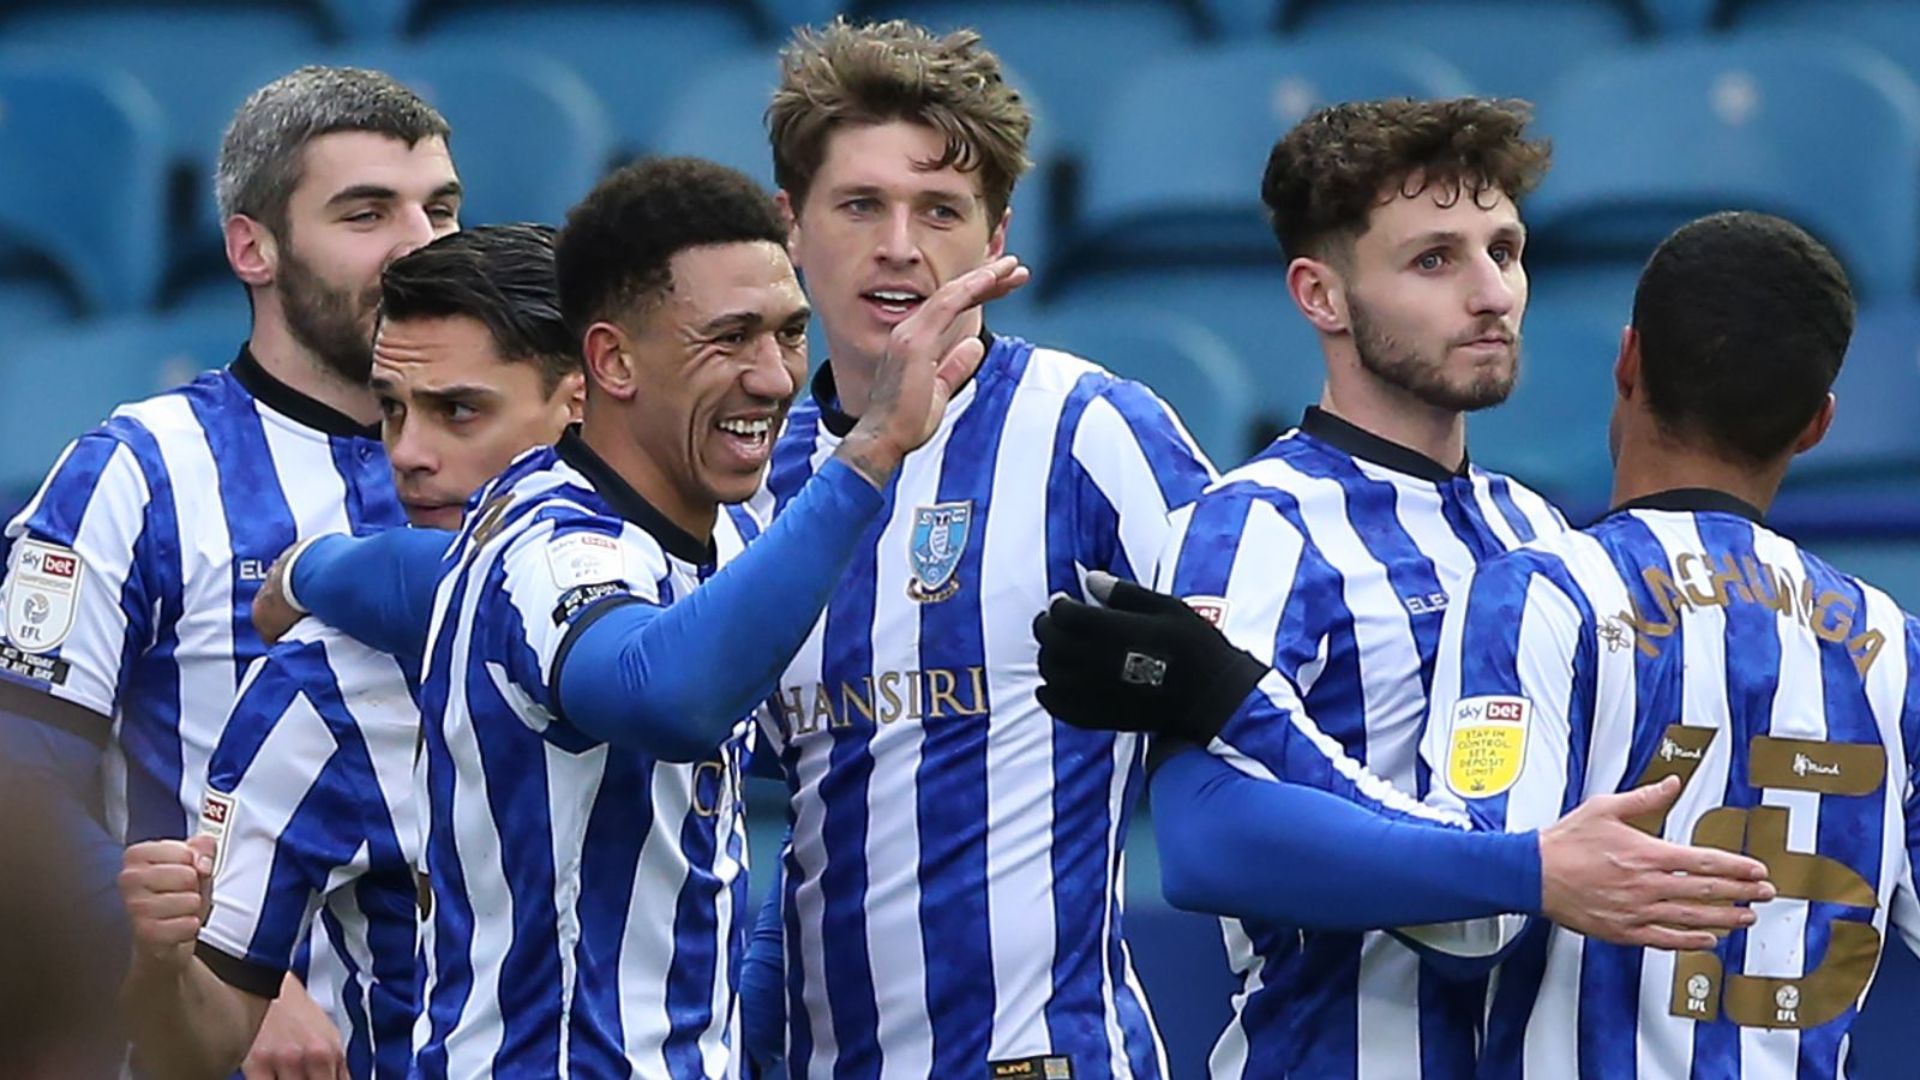 Sheffield Wednesday is expecting to draw on its advantage in clash